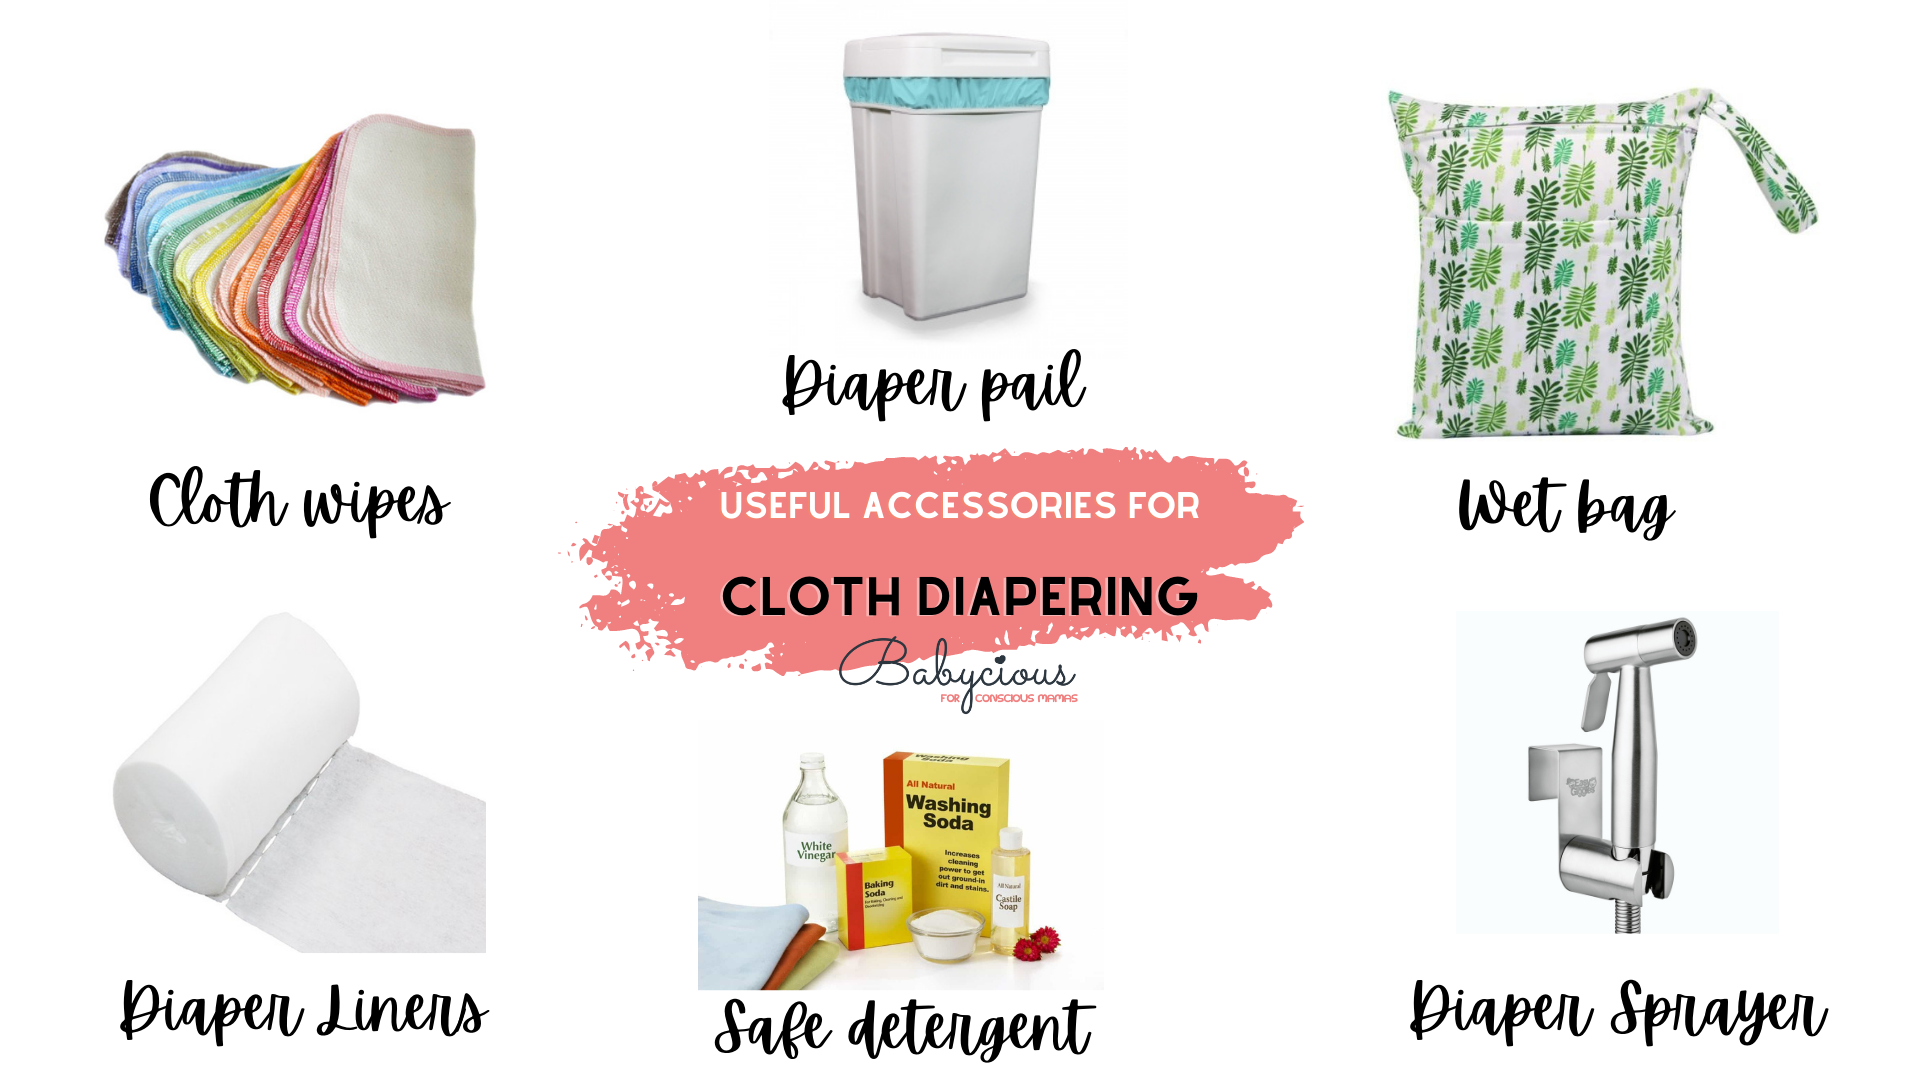 Cloth diapering accessories